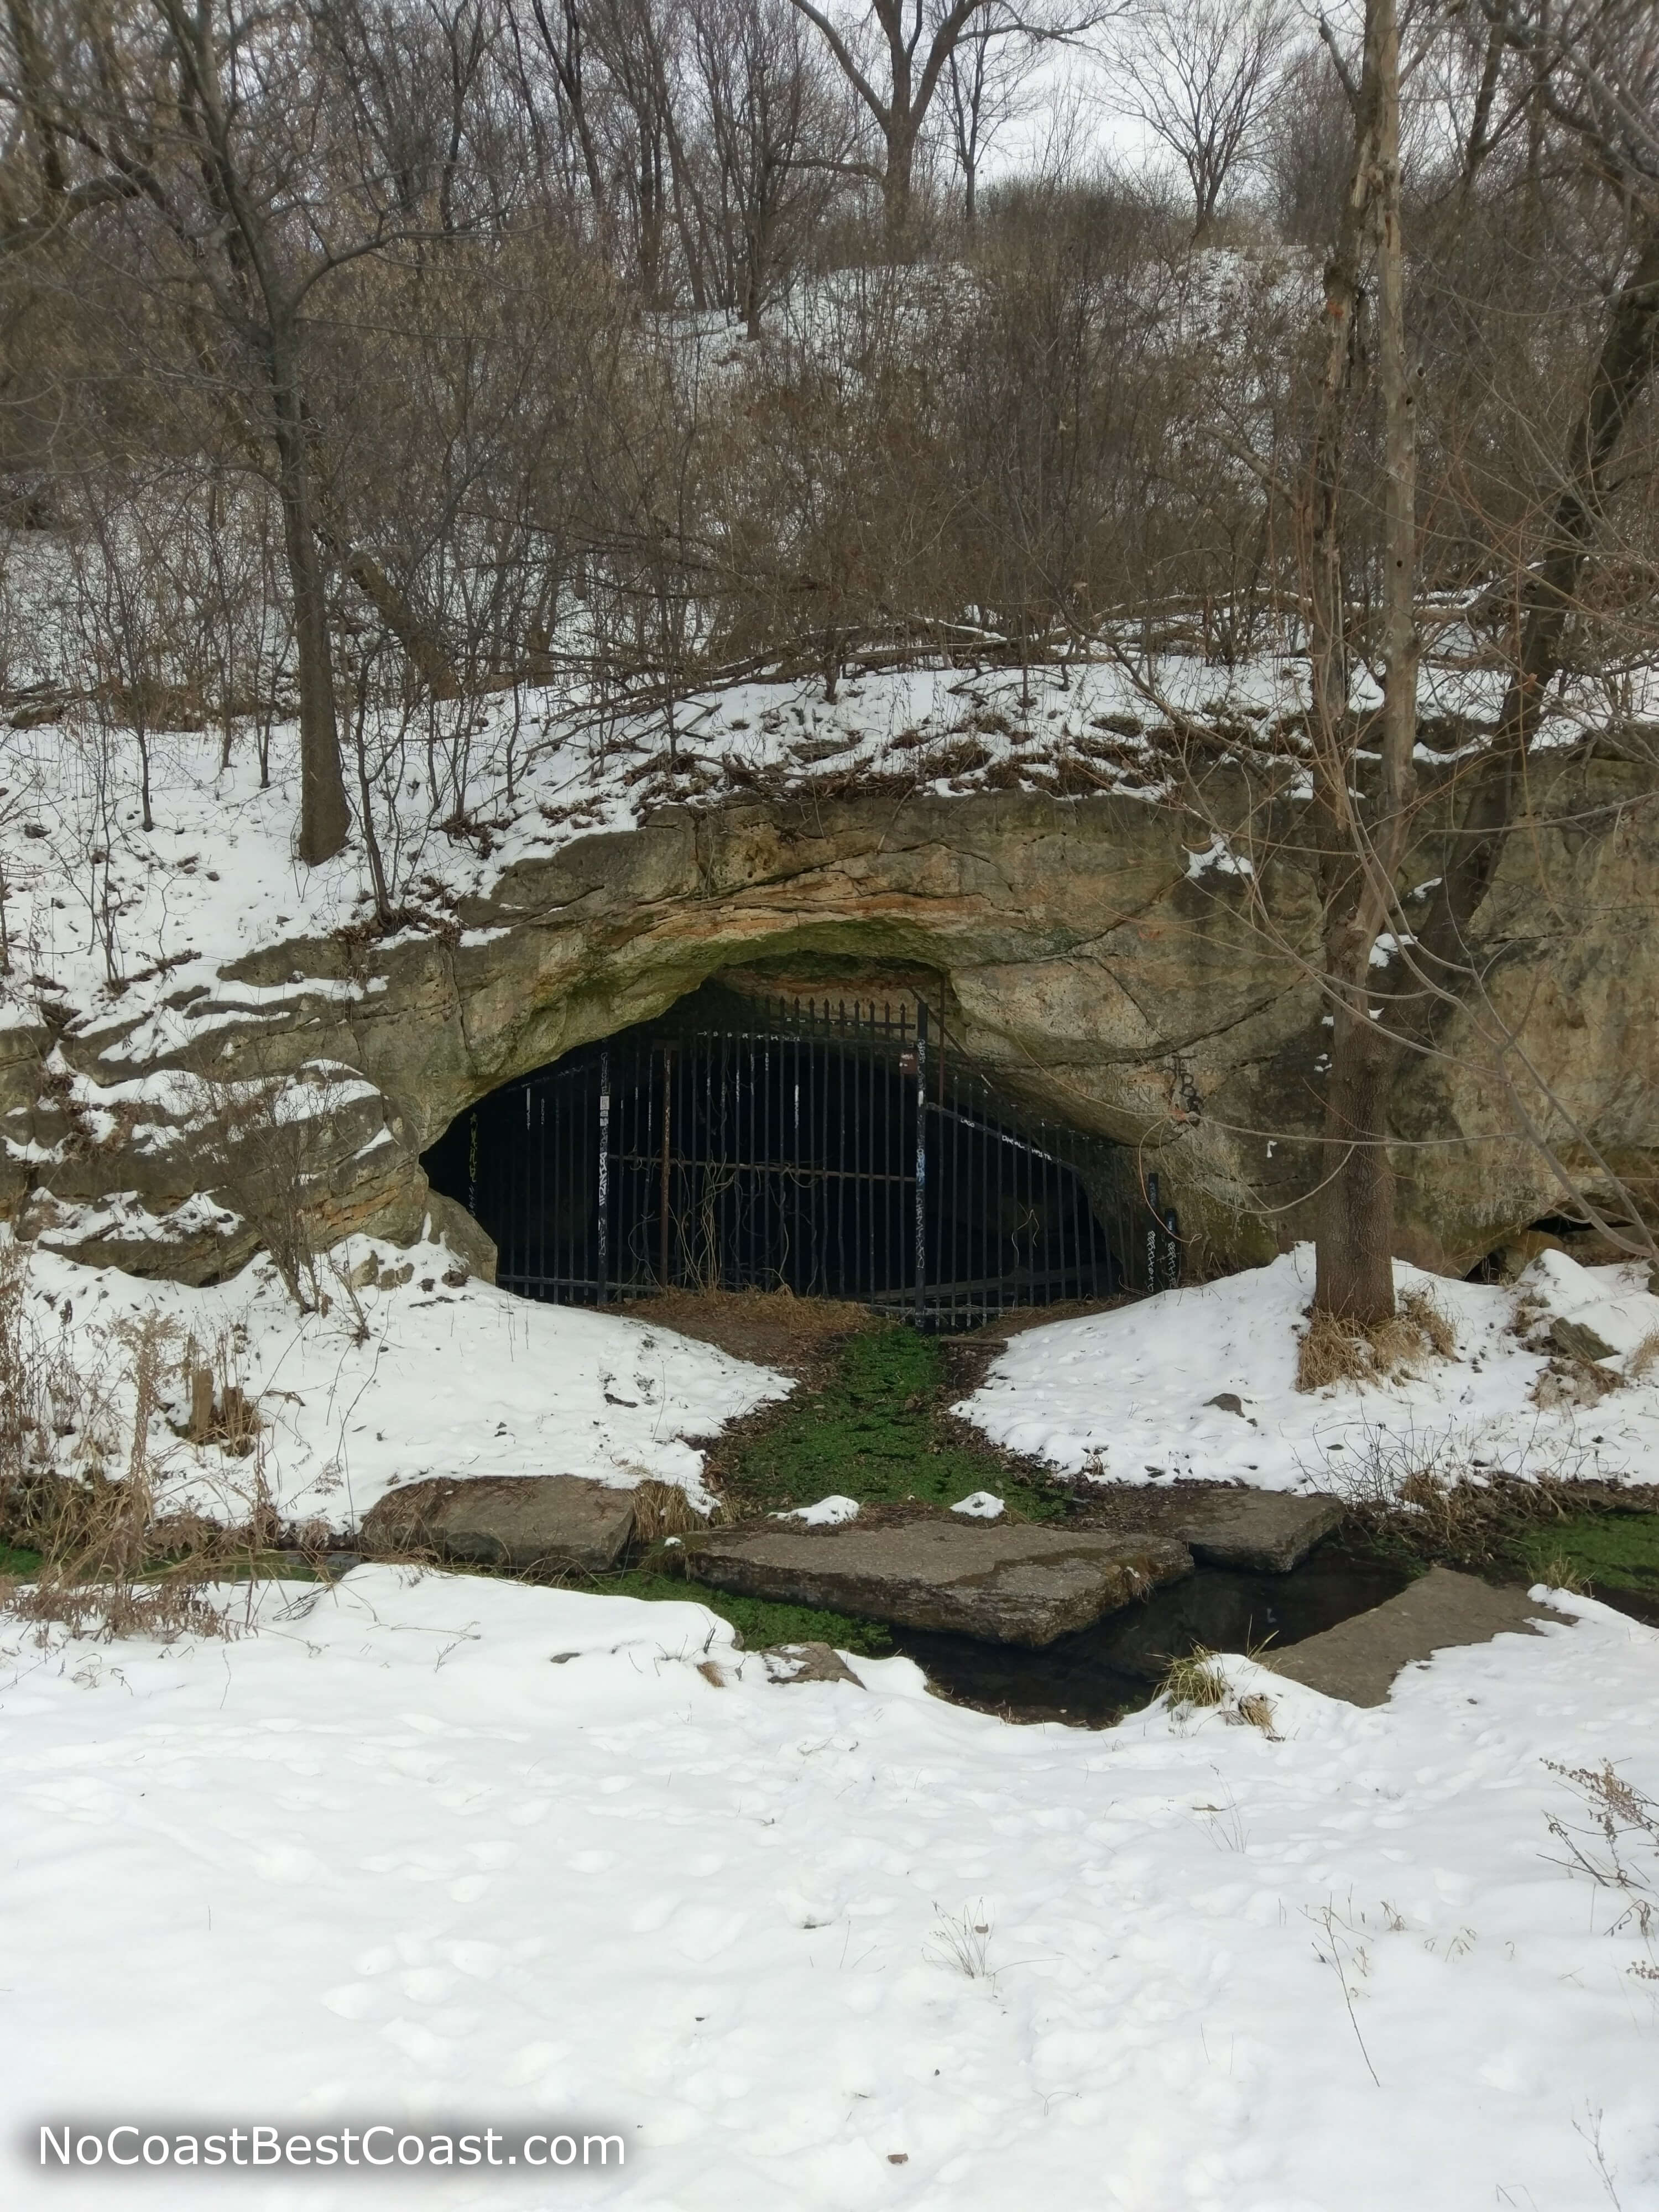 The fenced-off entrance of Carver's Cave